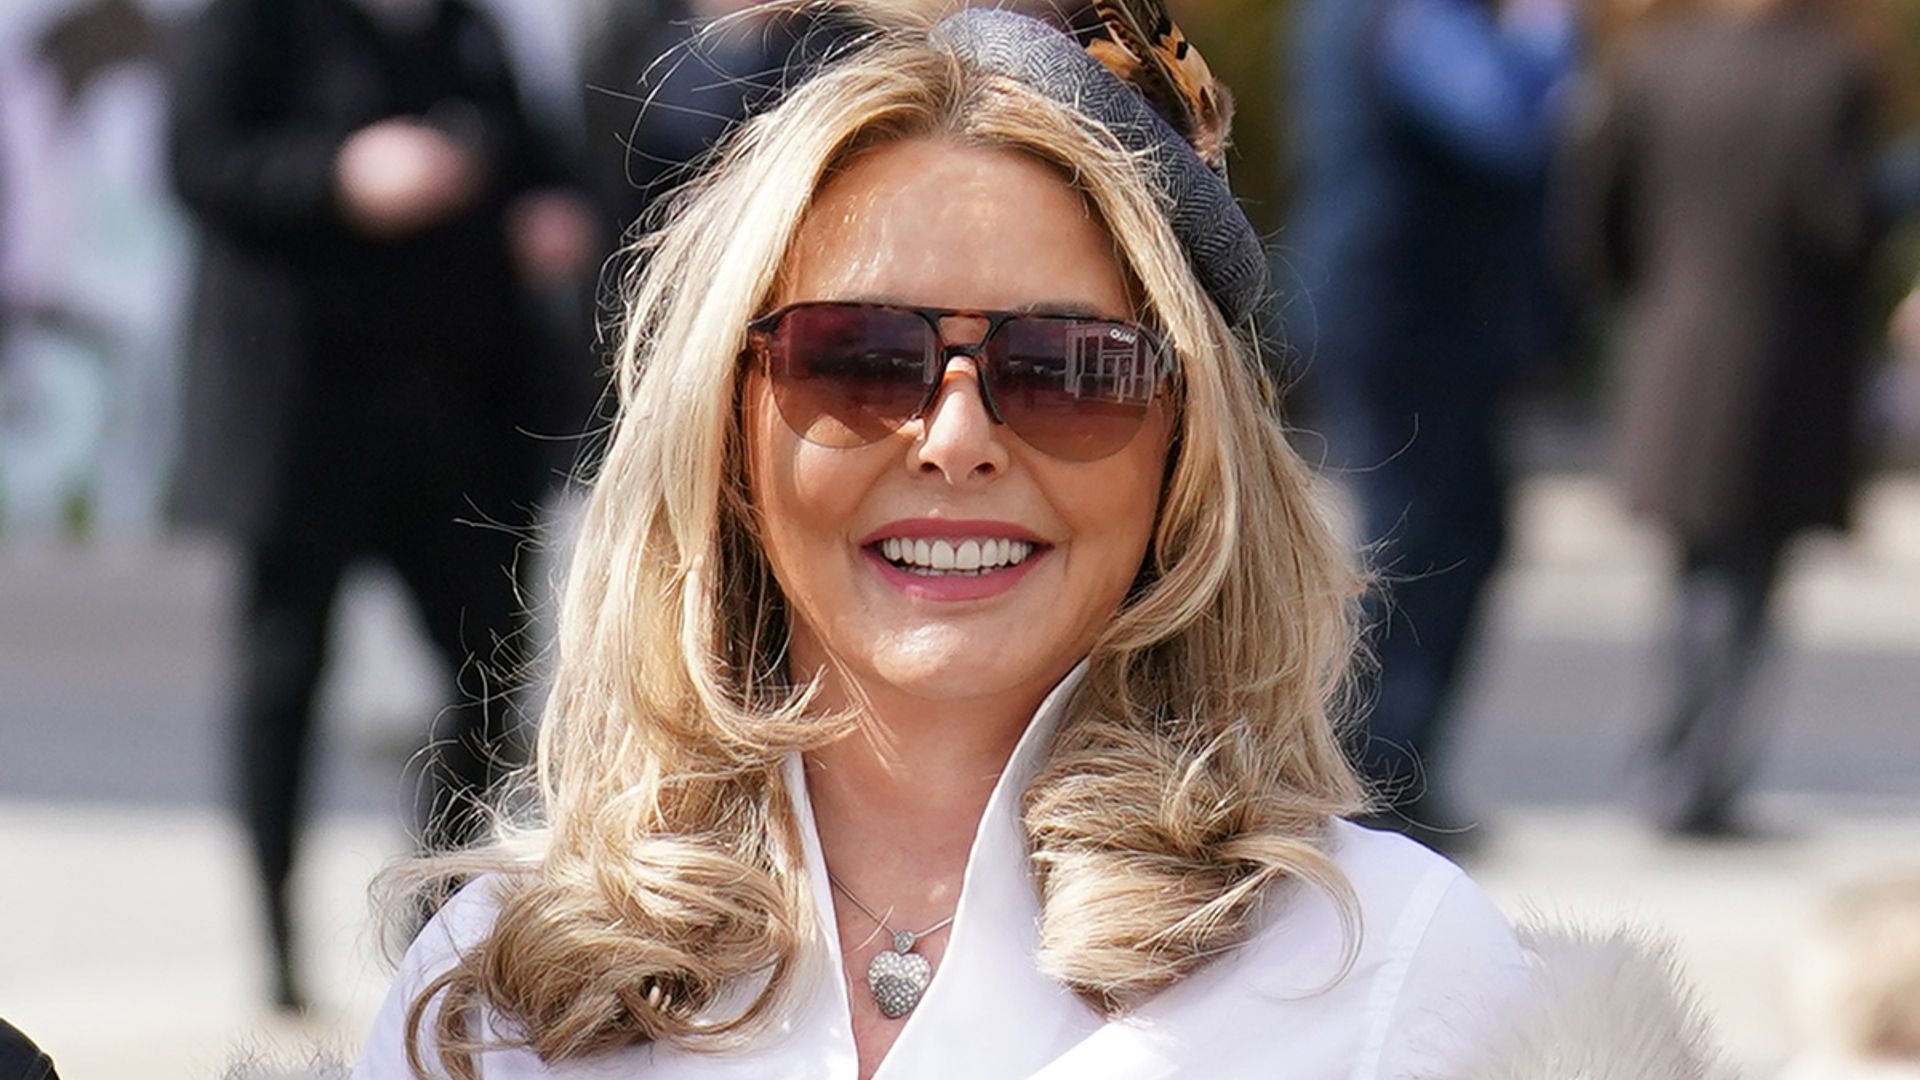 Carol Vorderman turns heads with seriously chic figure-hugging outfit at Cheltenham races